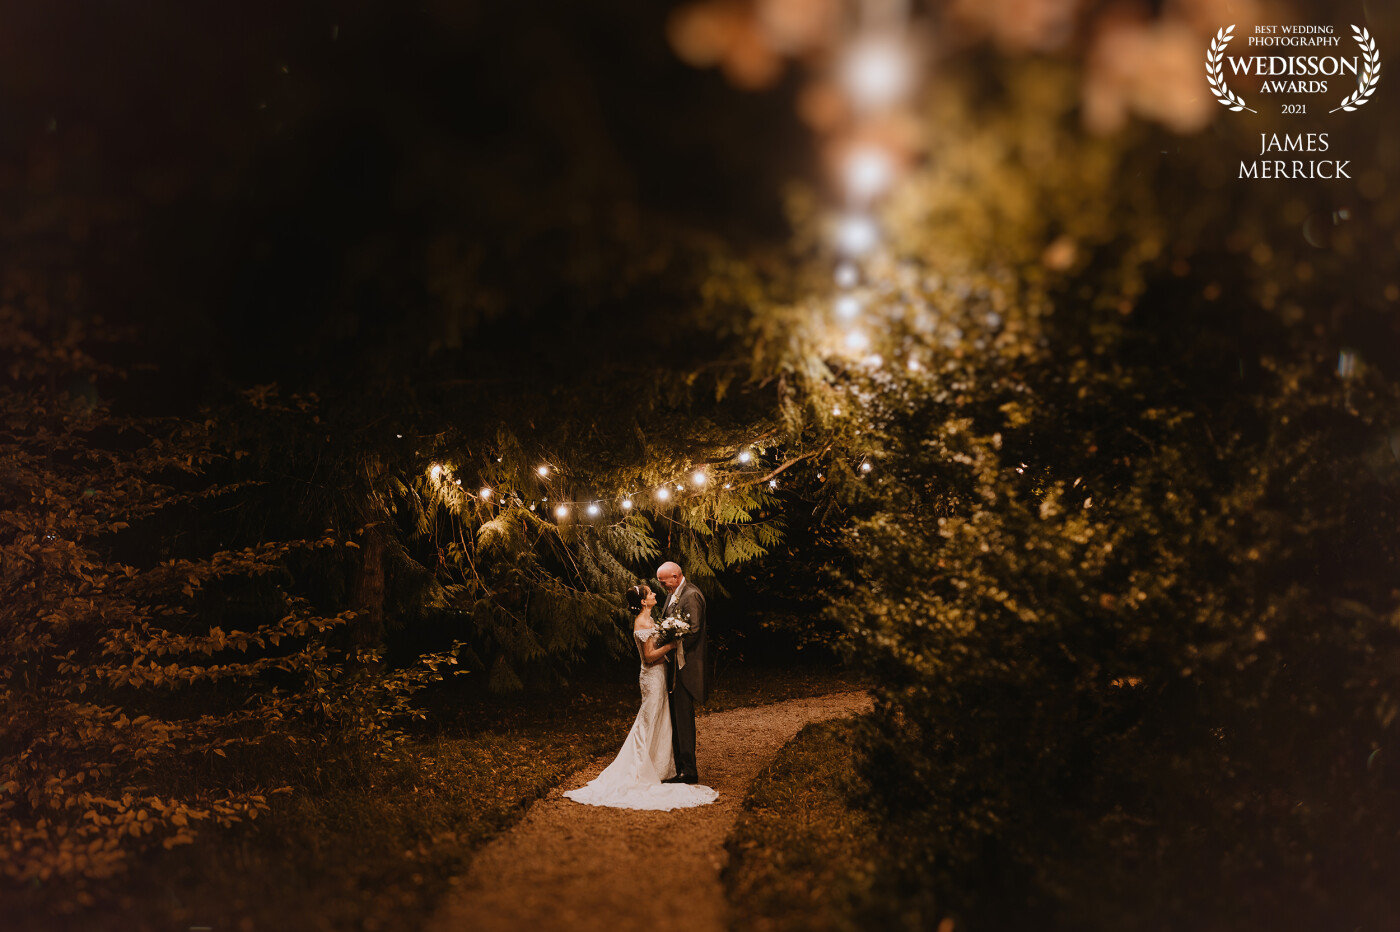 Manor by the Lake is a wonderful venue in the Contswolds, UK. This frame was using 100% natural ambient light and I was so happy the couple trusted me to brave the cold walk to get this!